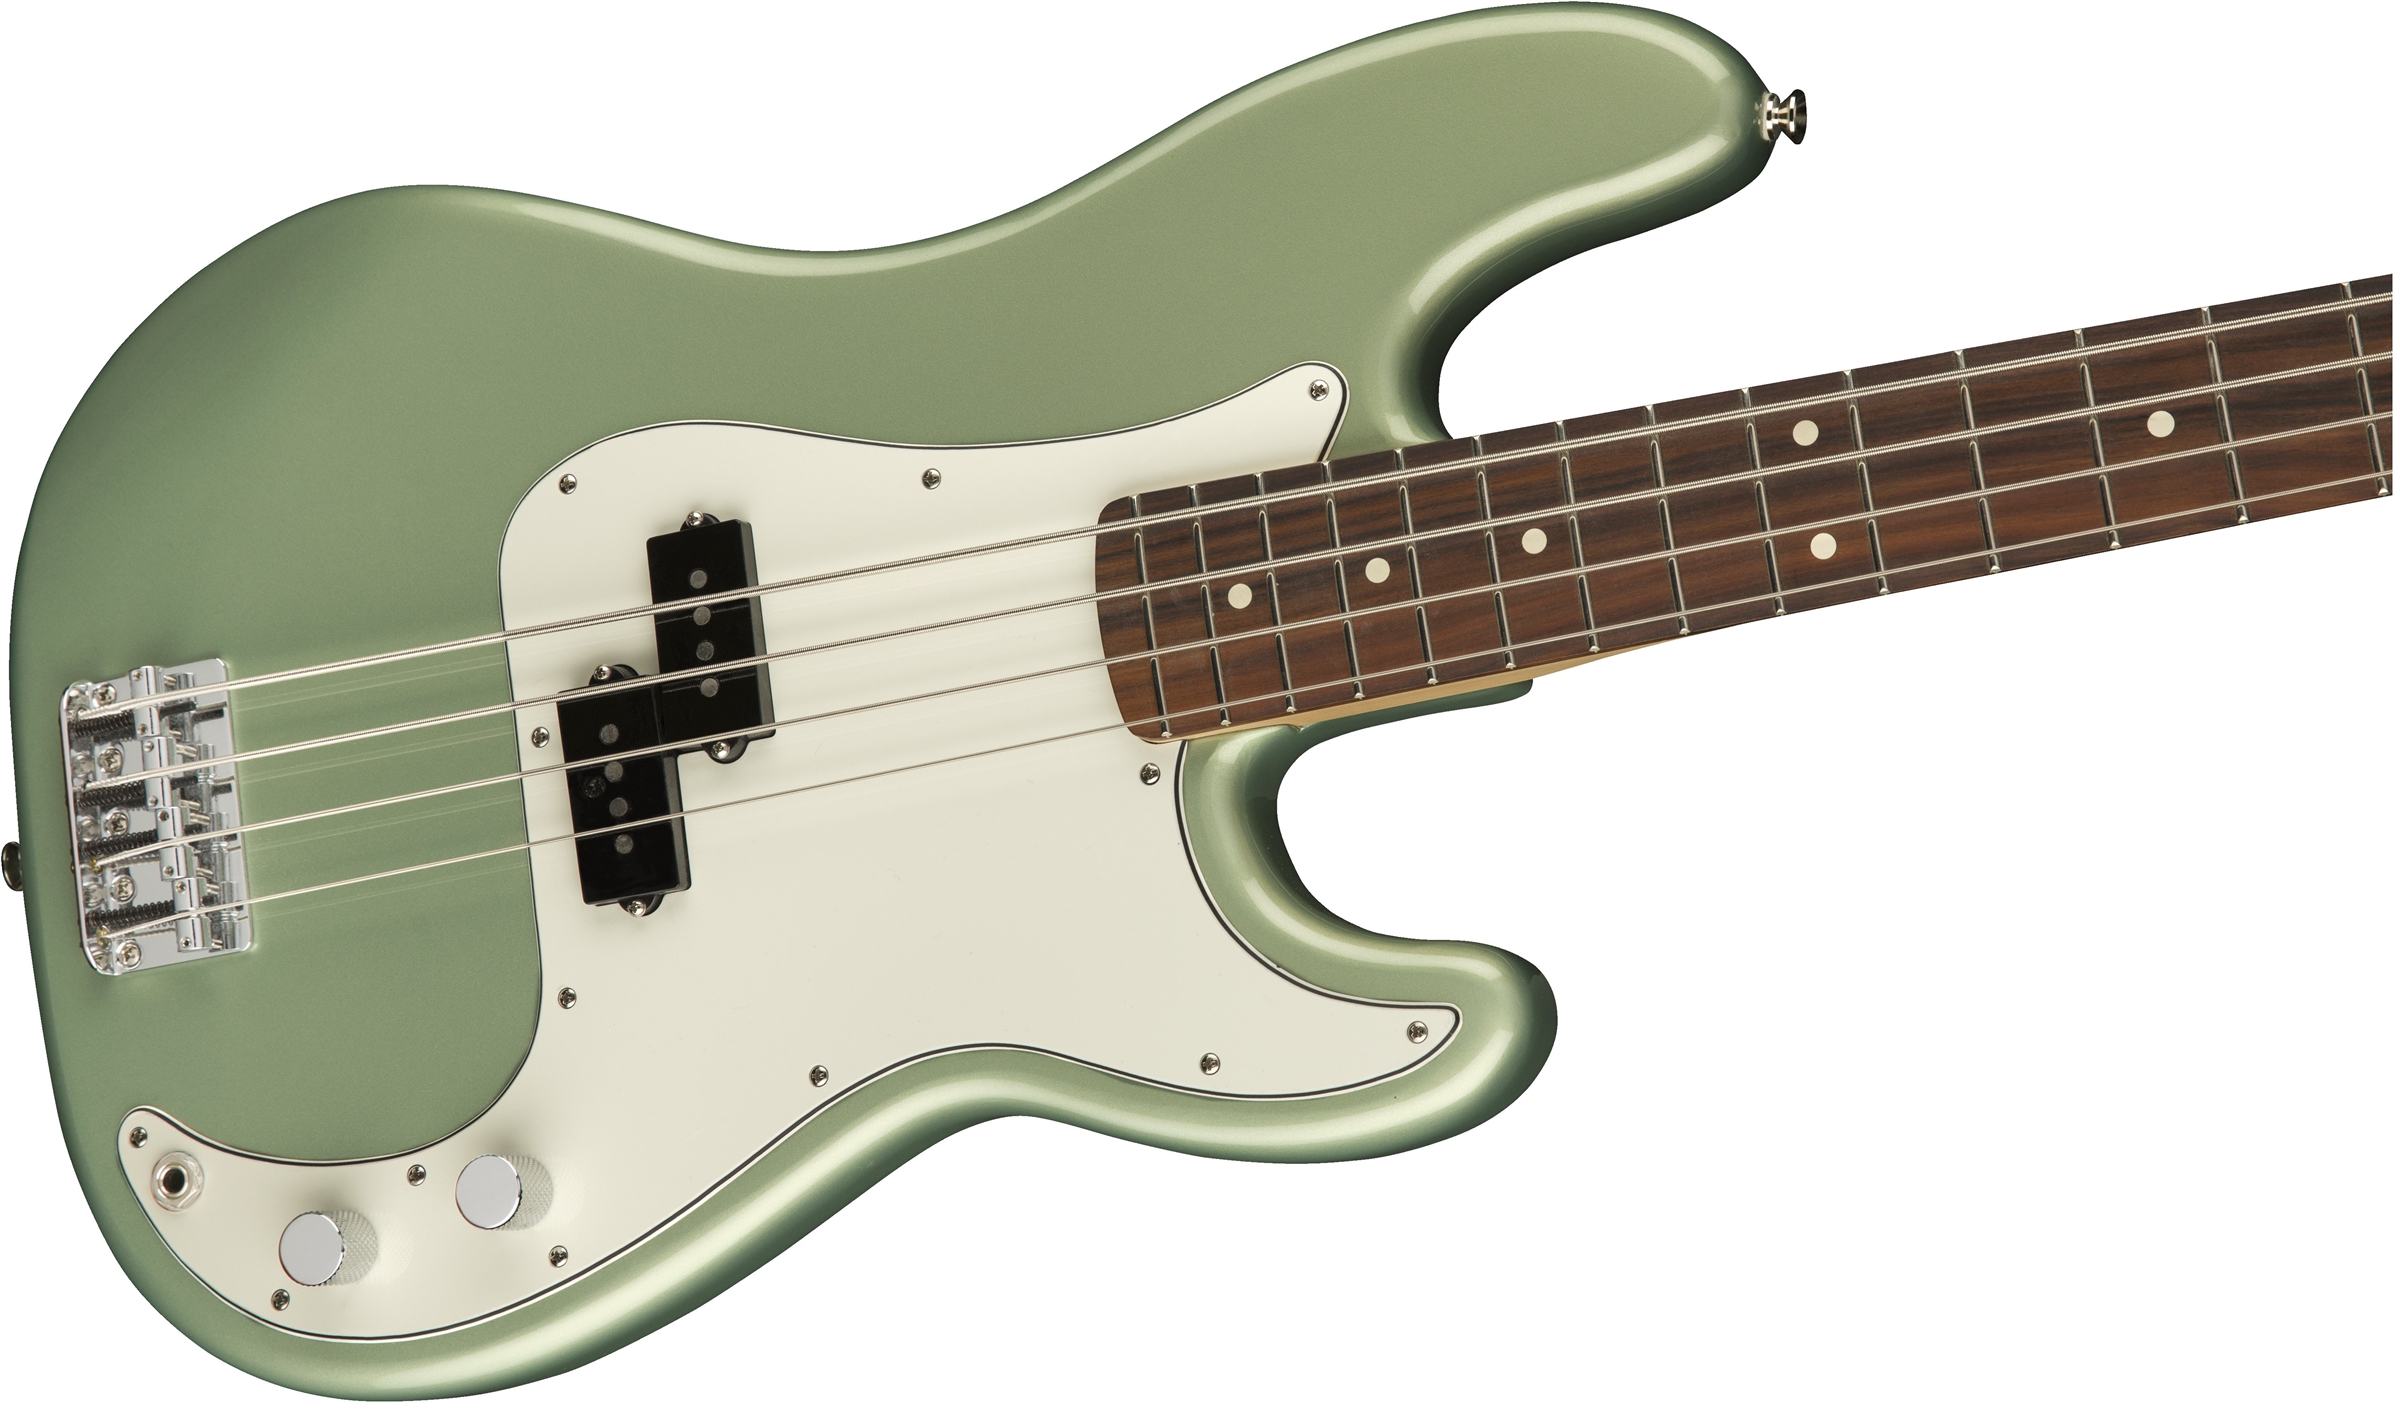 Fender Precision Bass Player Mex Pf - Sage Green Metallic - Solid body electric bass - Variation 3